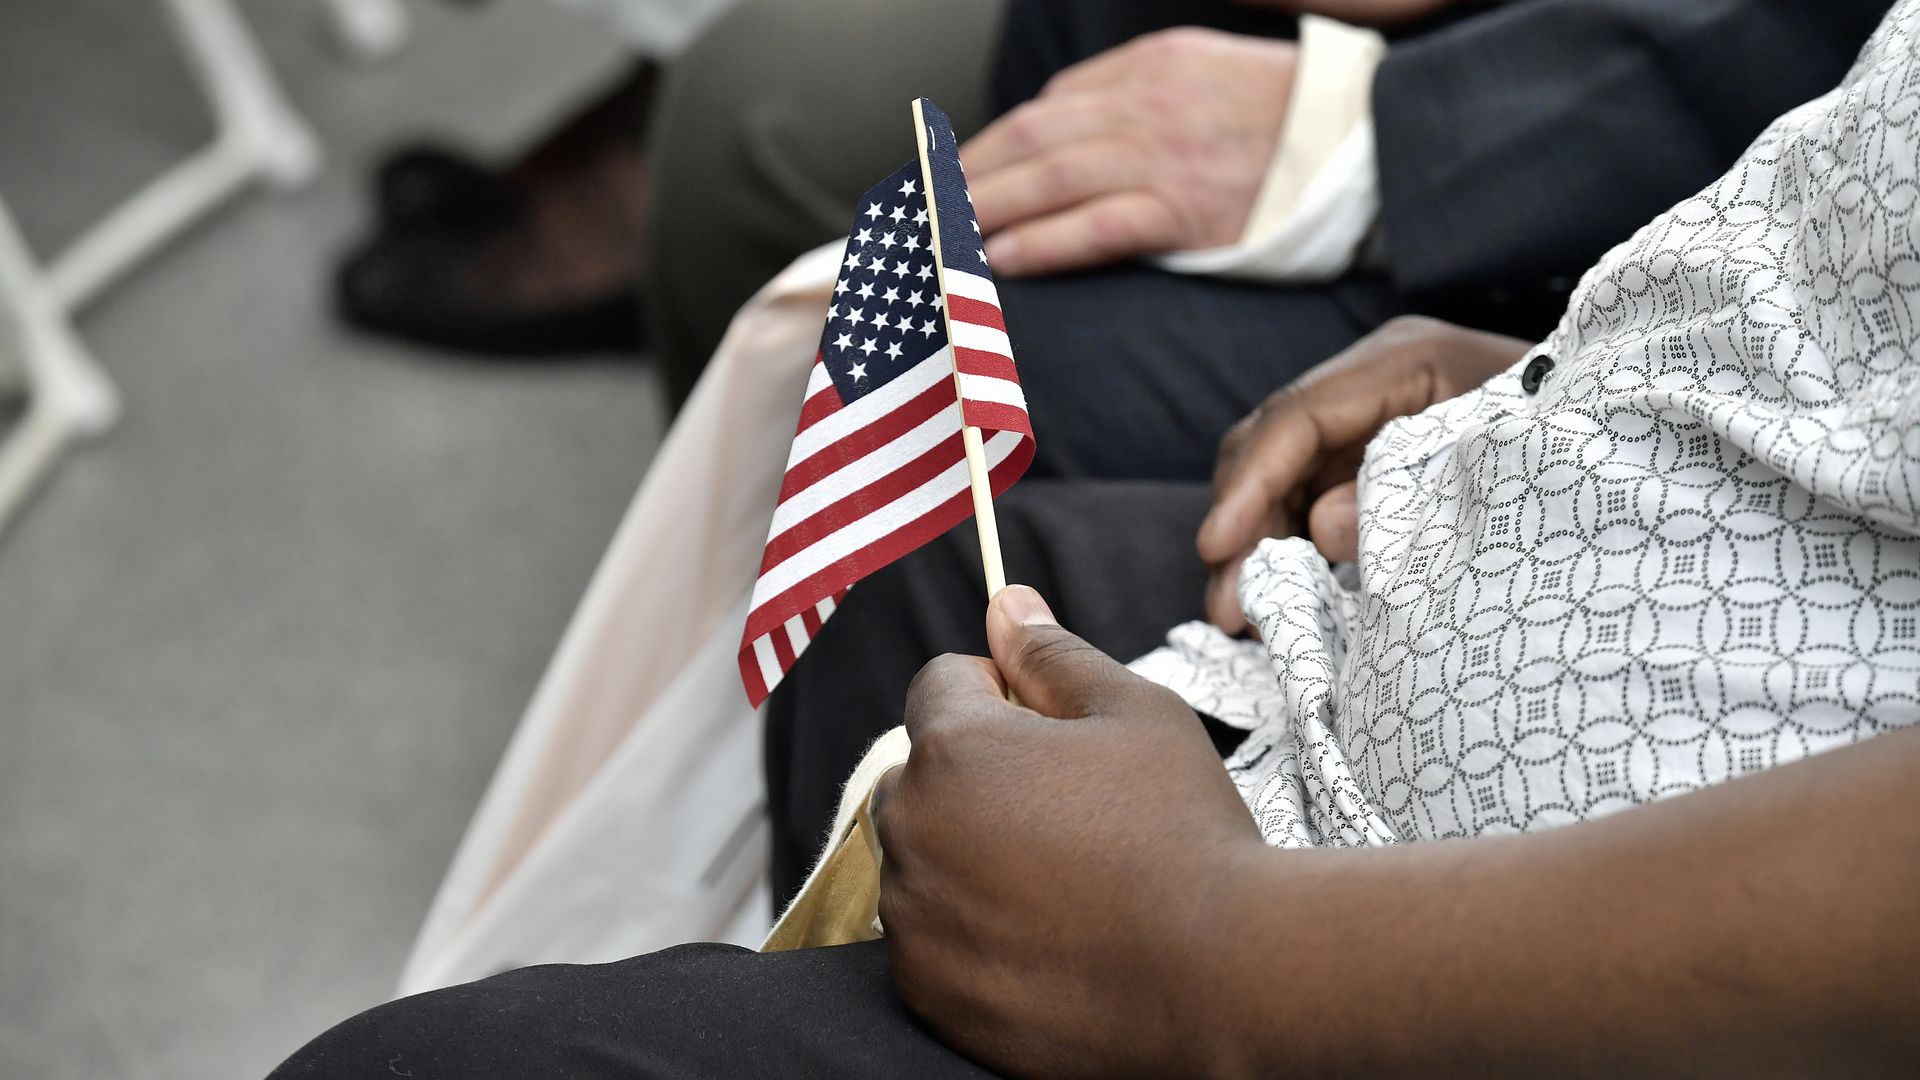 An attendee holds an American flag at a United States naturalization ceremony